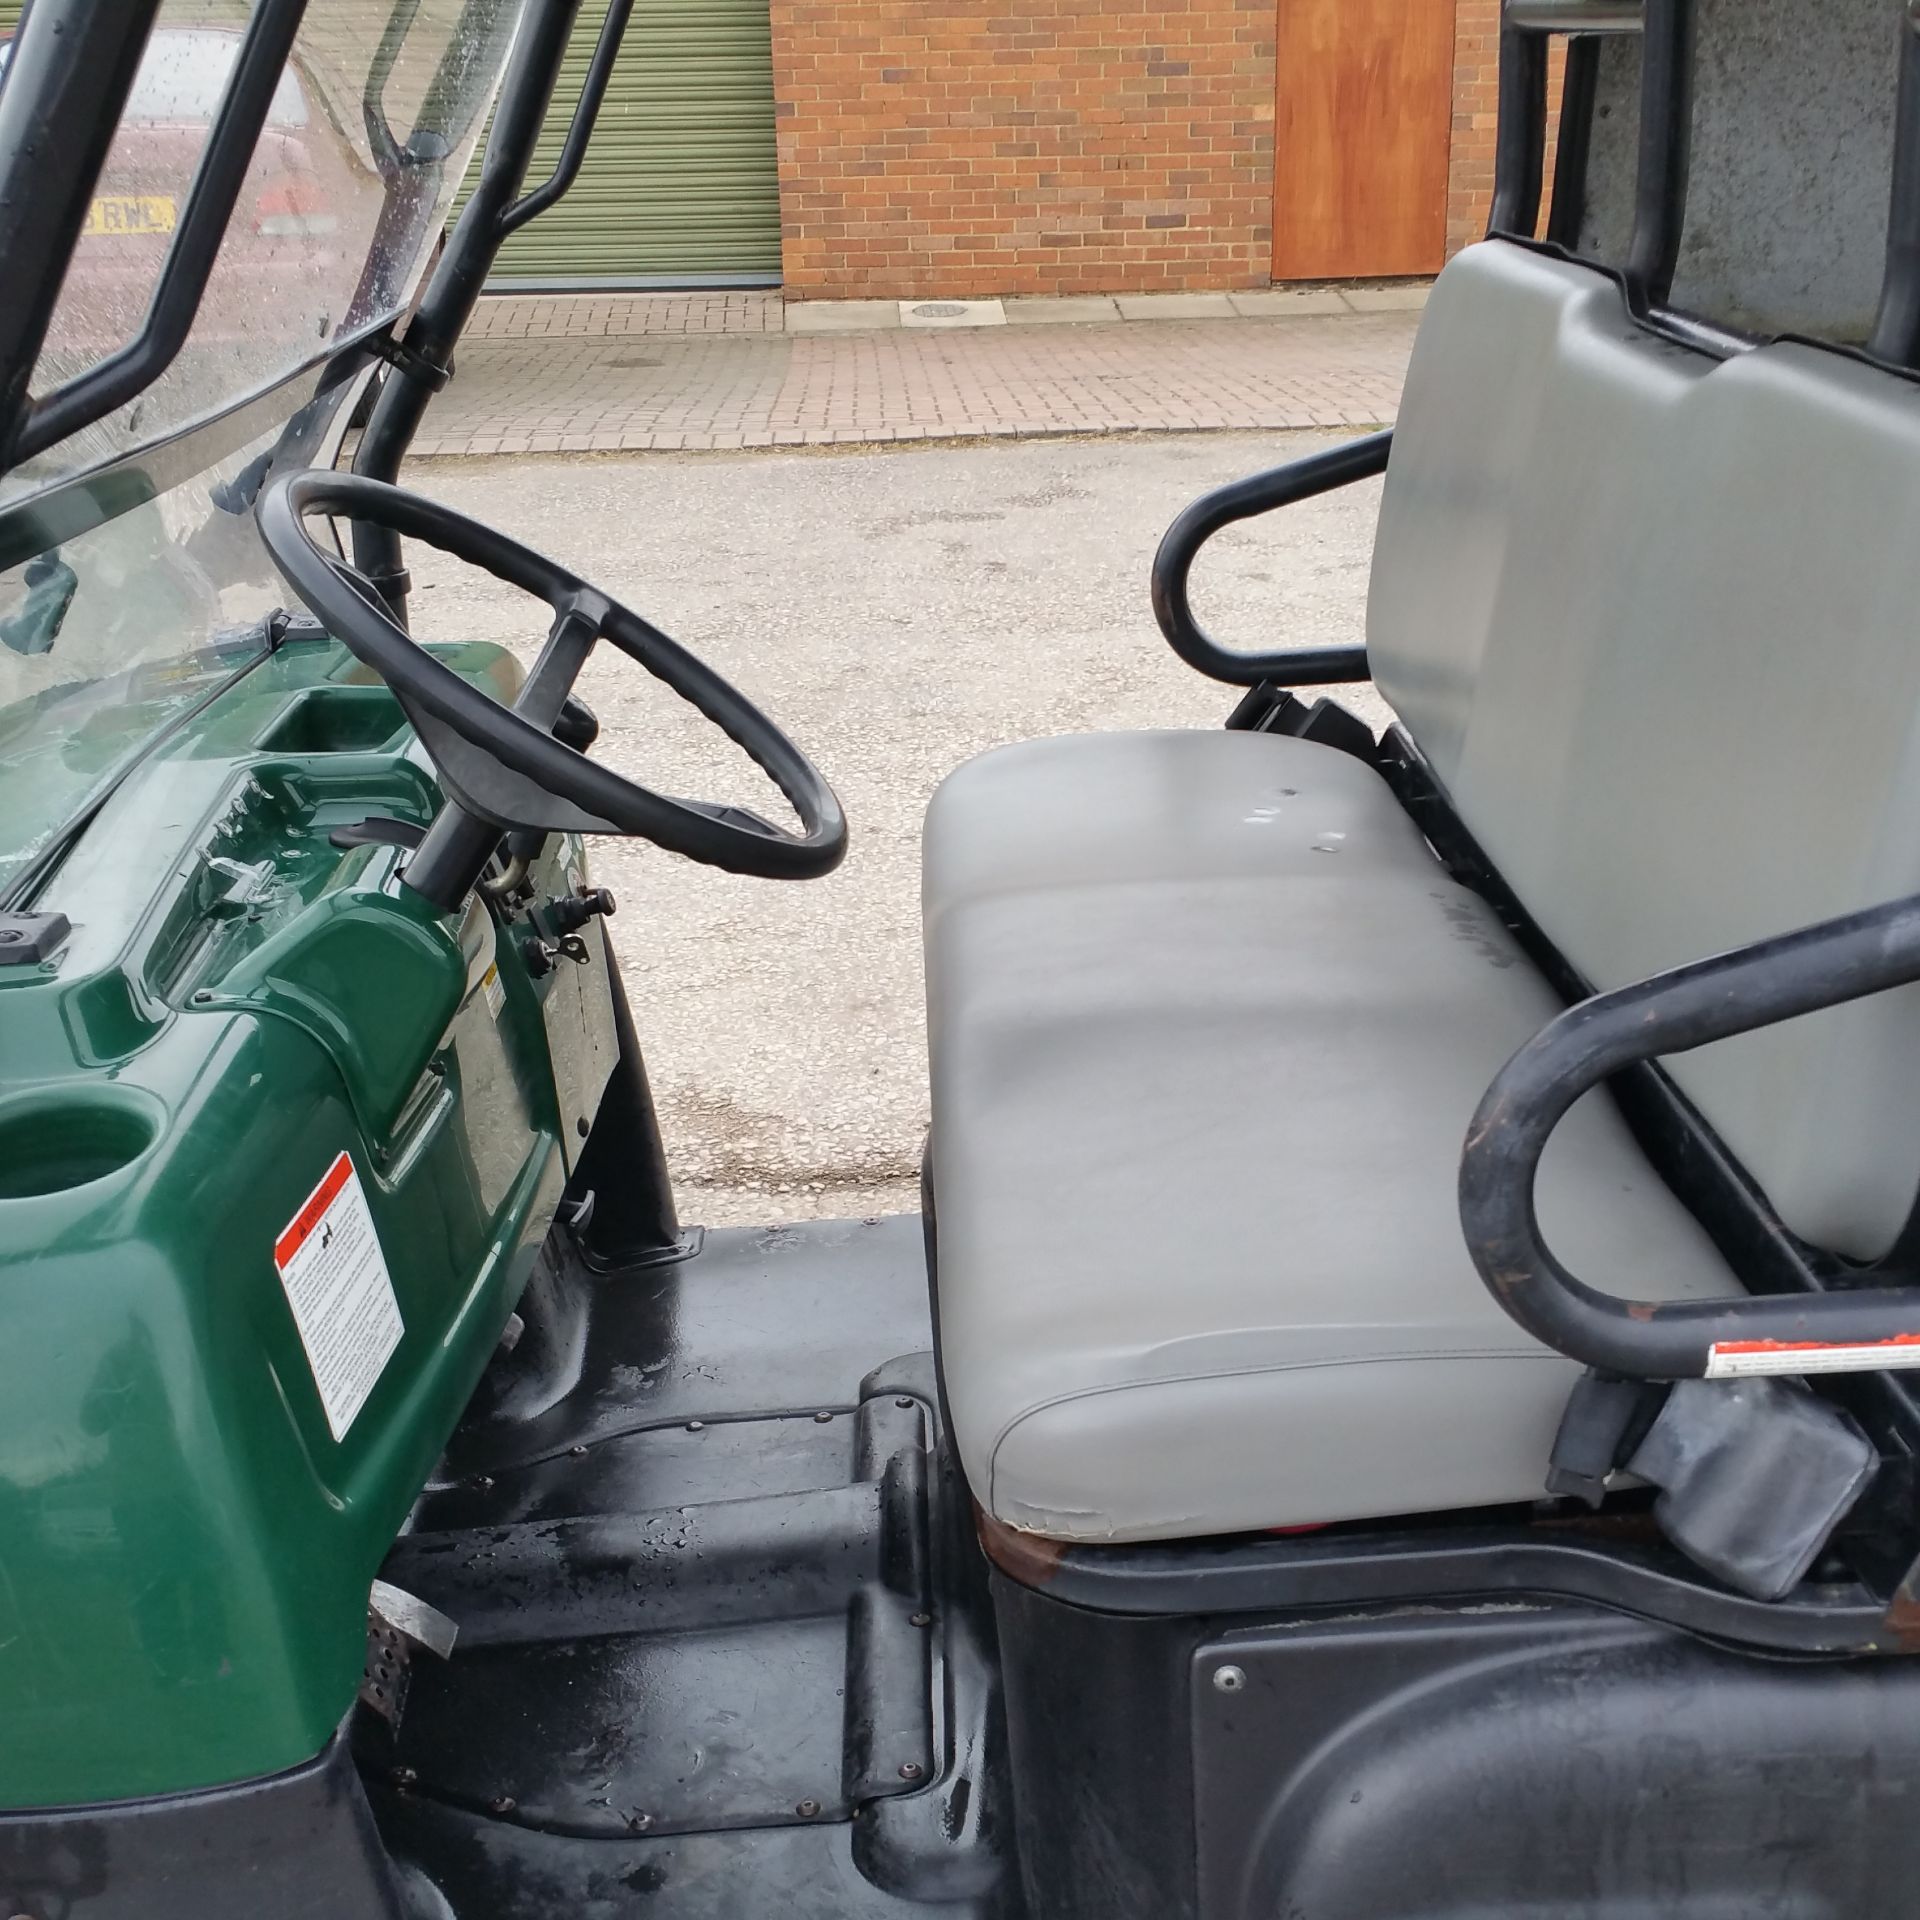 Polaris Ranger 6x6 500cc single cylinder petrol Hours 932 Year of manufacture 2004 4 or 6 wheel - Image 7 of 7